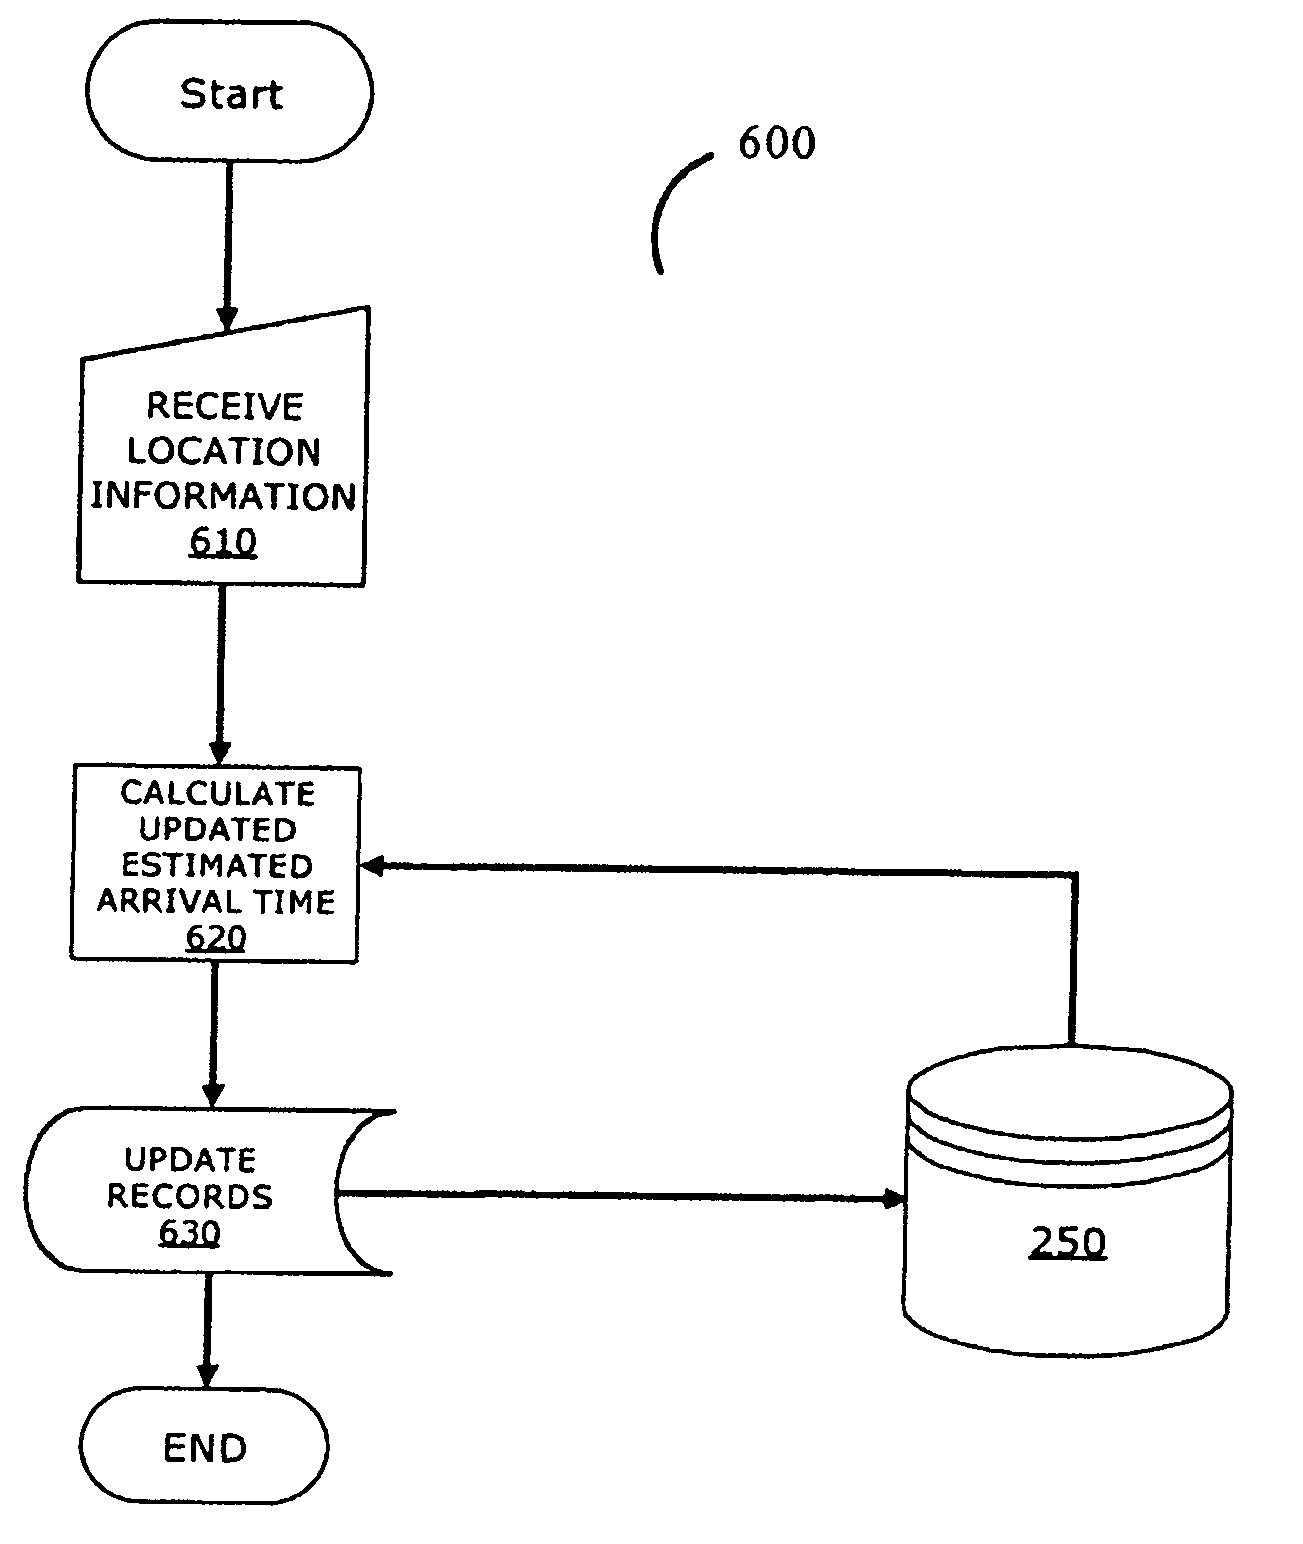 Computer-based dispatching system and method